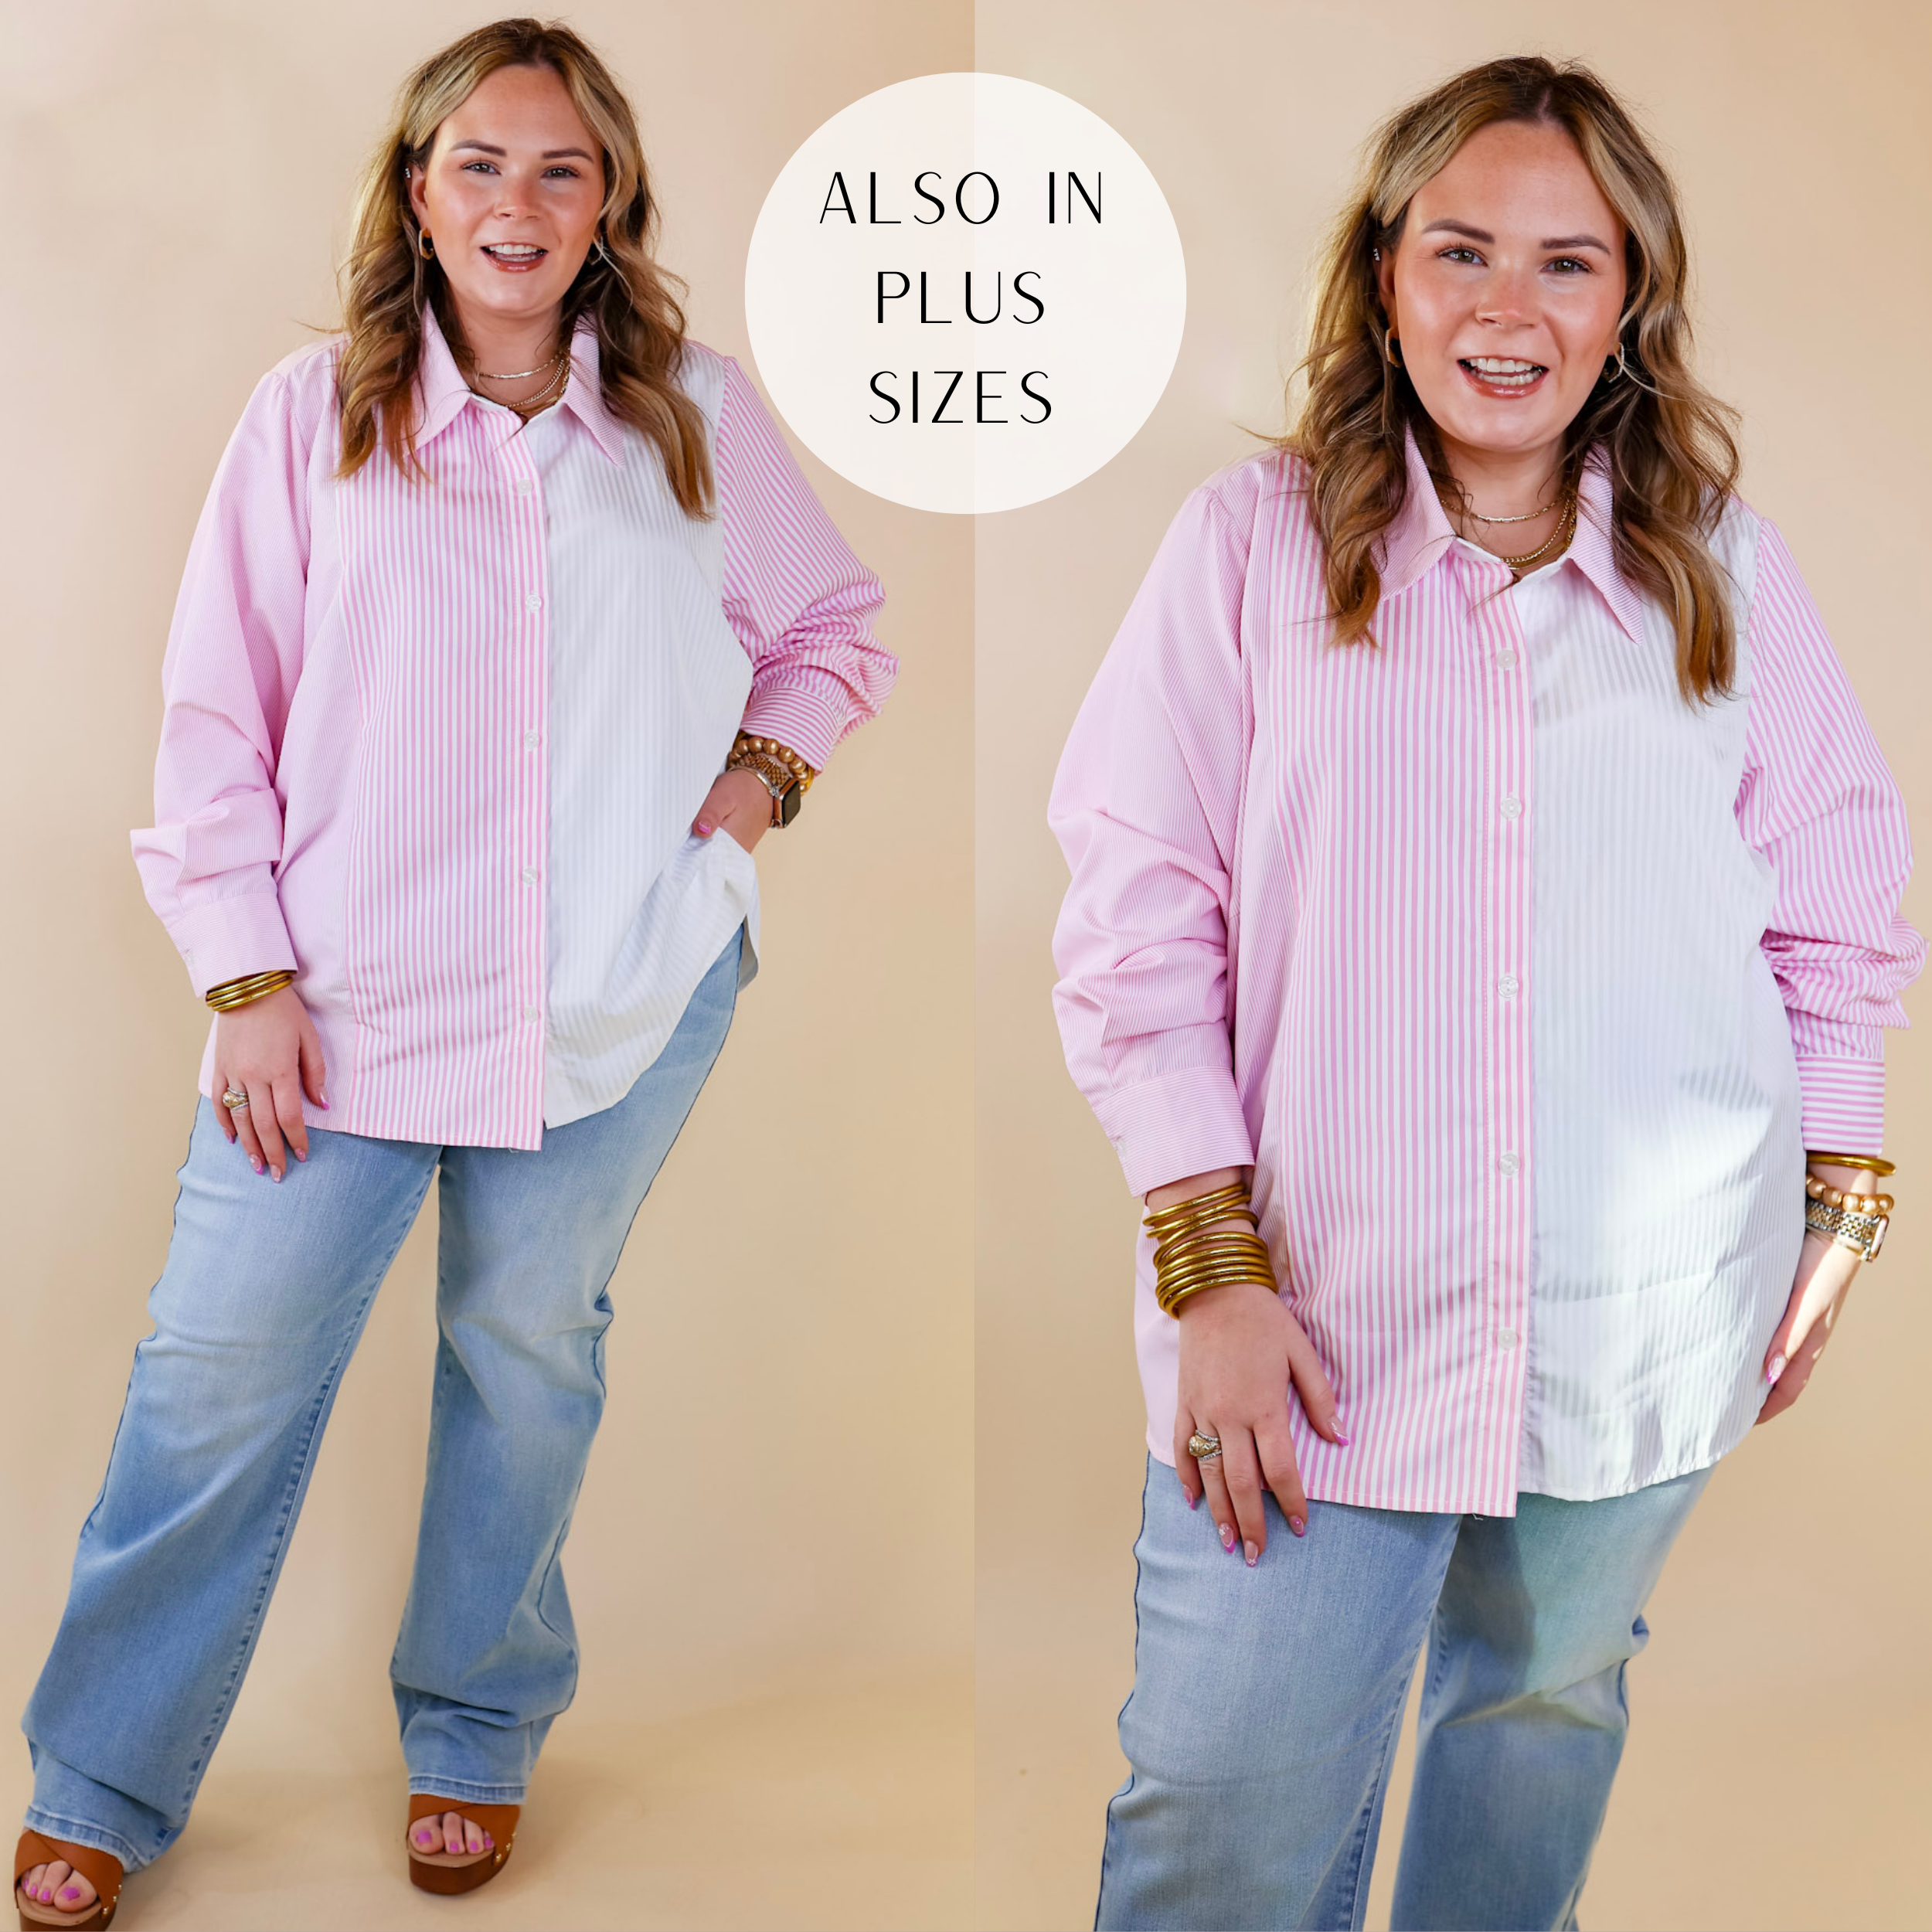 Model is wearing a button up top with long sleeves and a collared neckline. This top is a pin stripe pattern that is half pink and half white. Model has it paired with light wash, wide leg jeans, tan wedges, and gold jewelry.